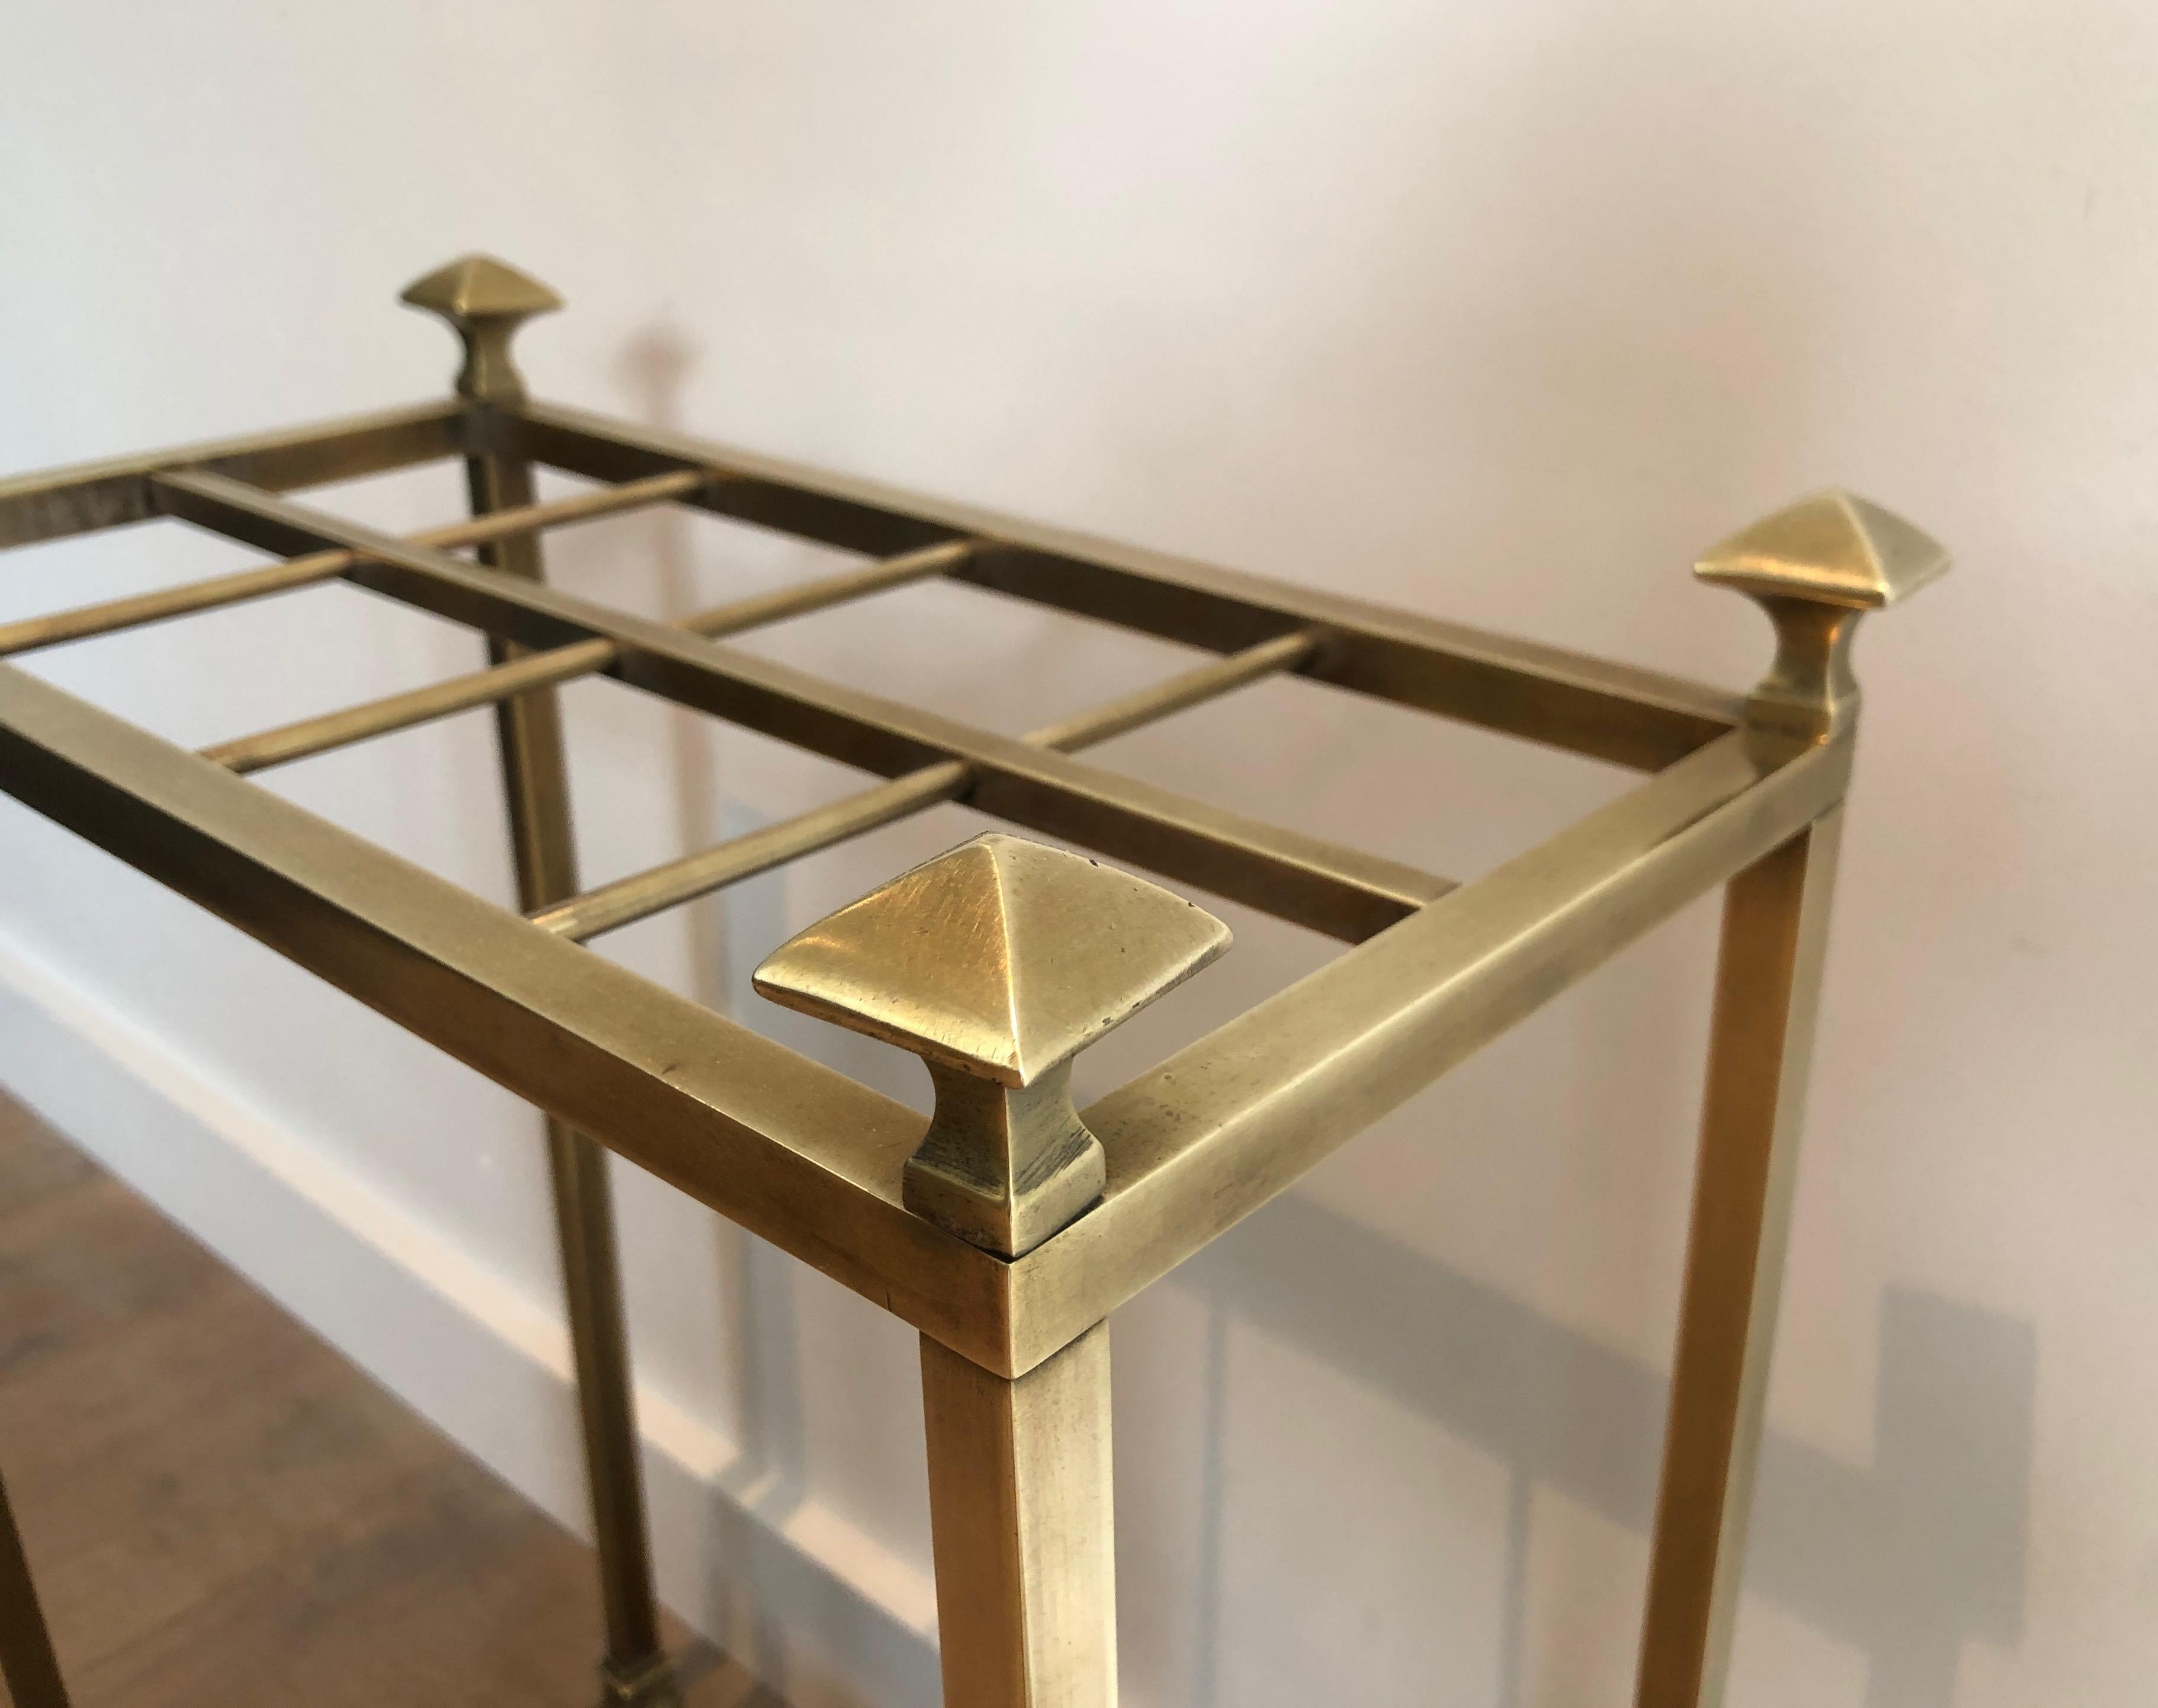 Early 20th Century Brass and Cast Iron Umbrella Stand, French, circa 1900 For Sale